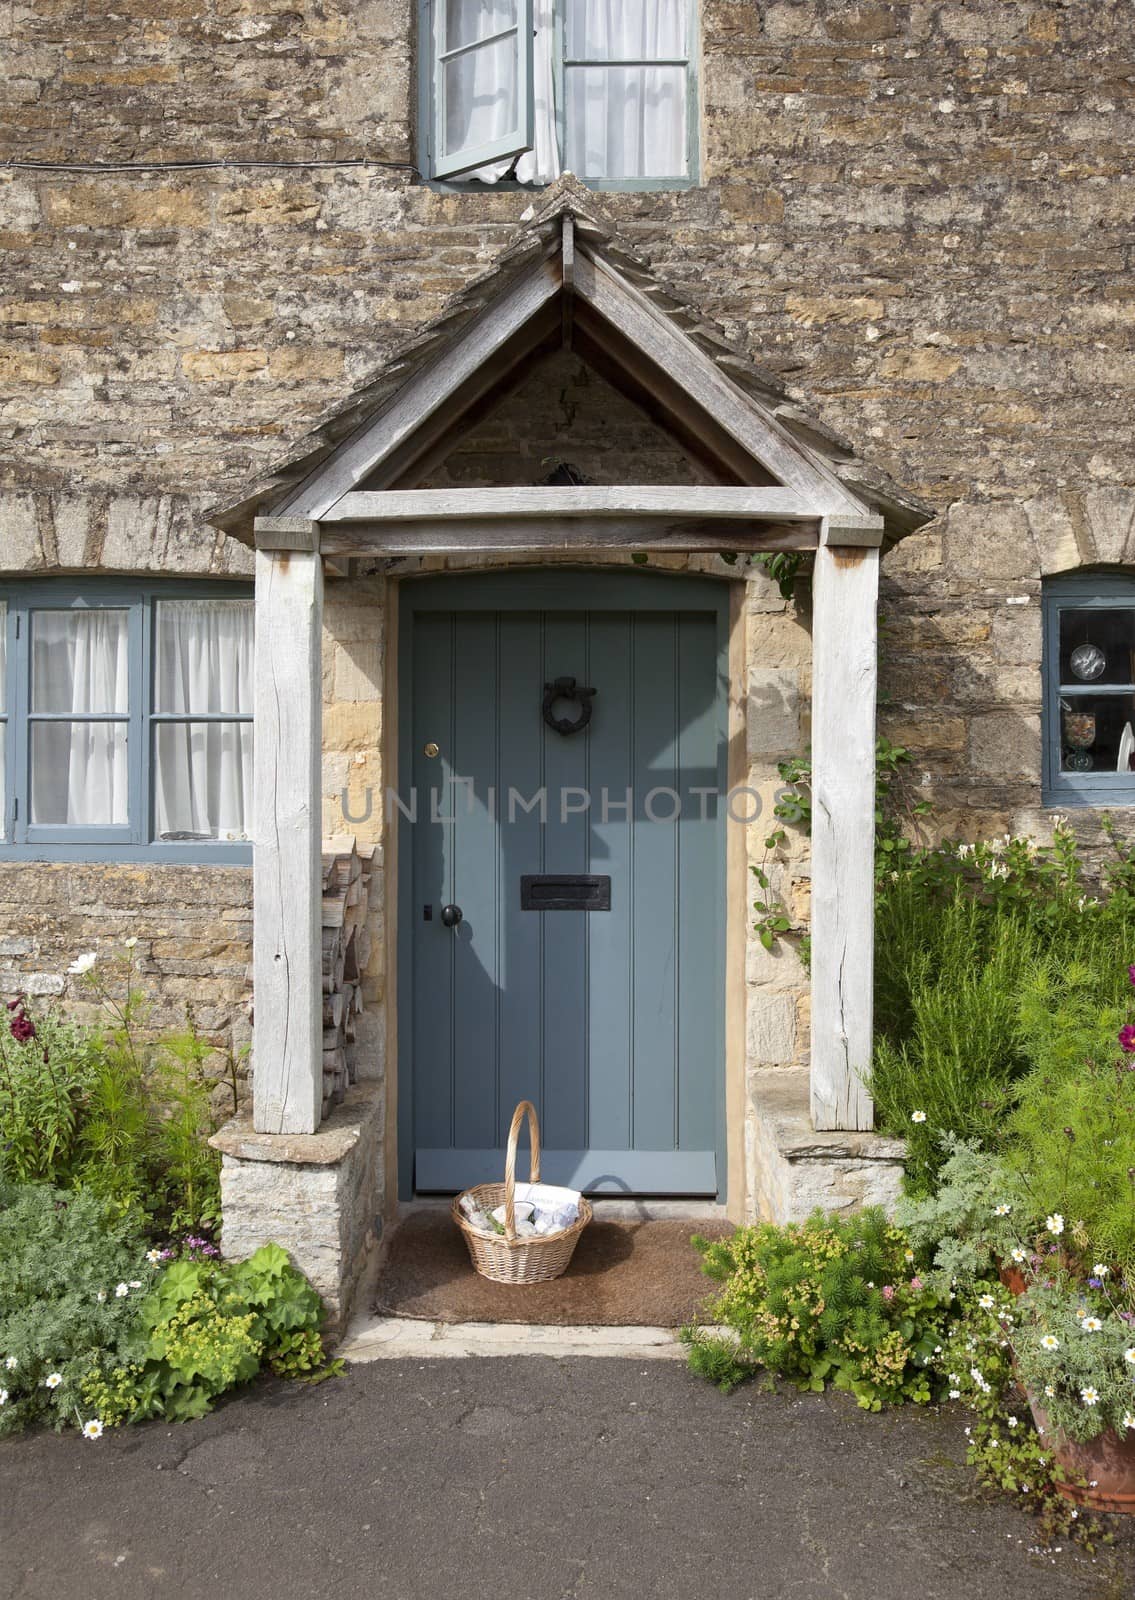 Pretty Cotswold cottage doorway with basket and flowers, Gloucestershire, England.